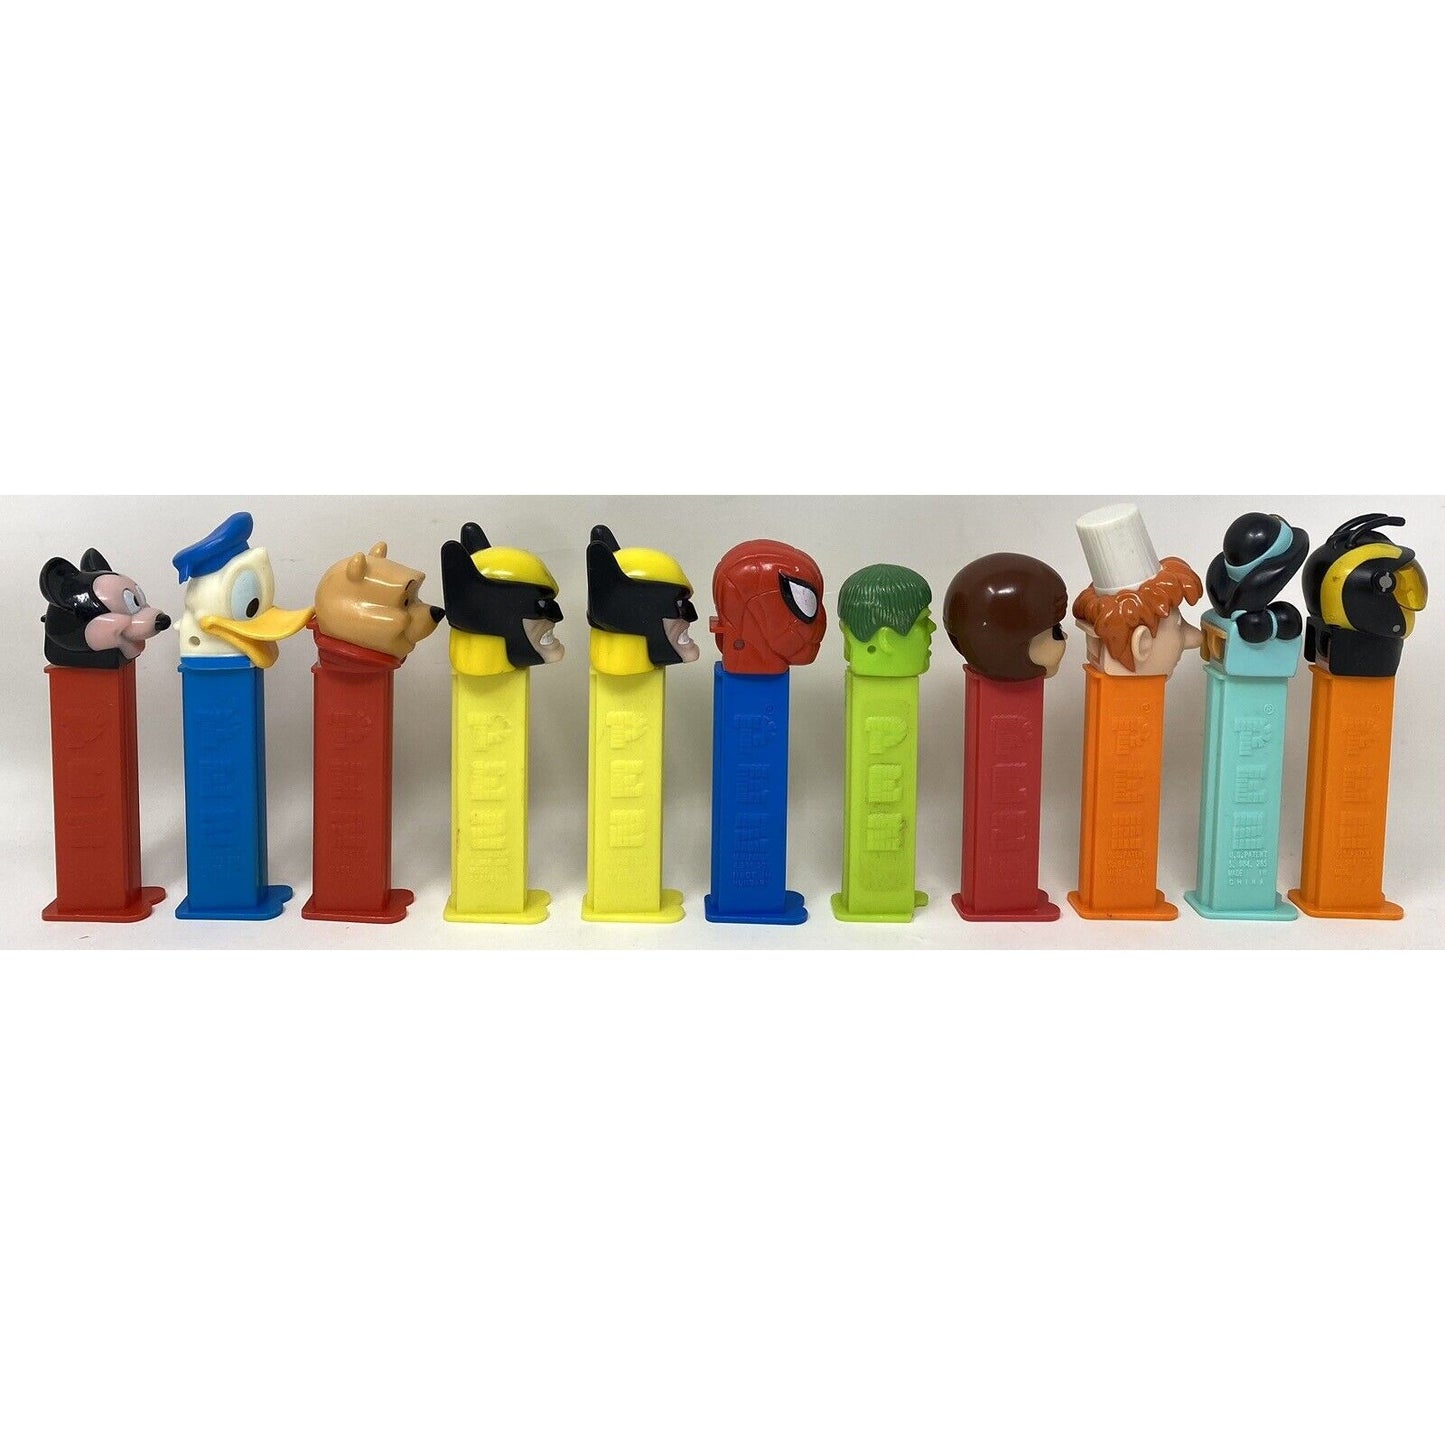 Lot of 11 Disney Characters & Marvel Superheroes PEZ Candy Dispensers